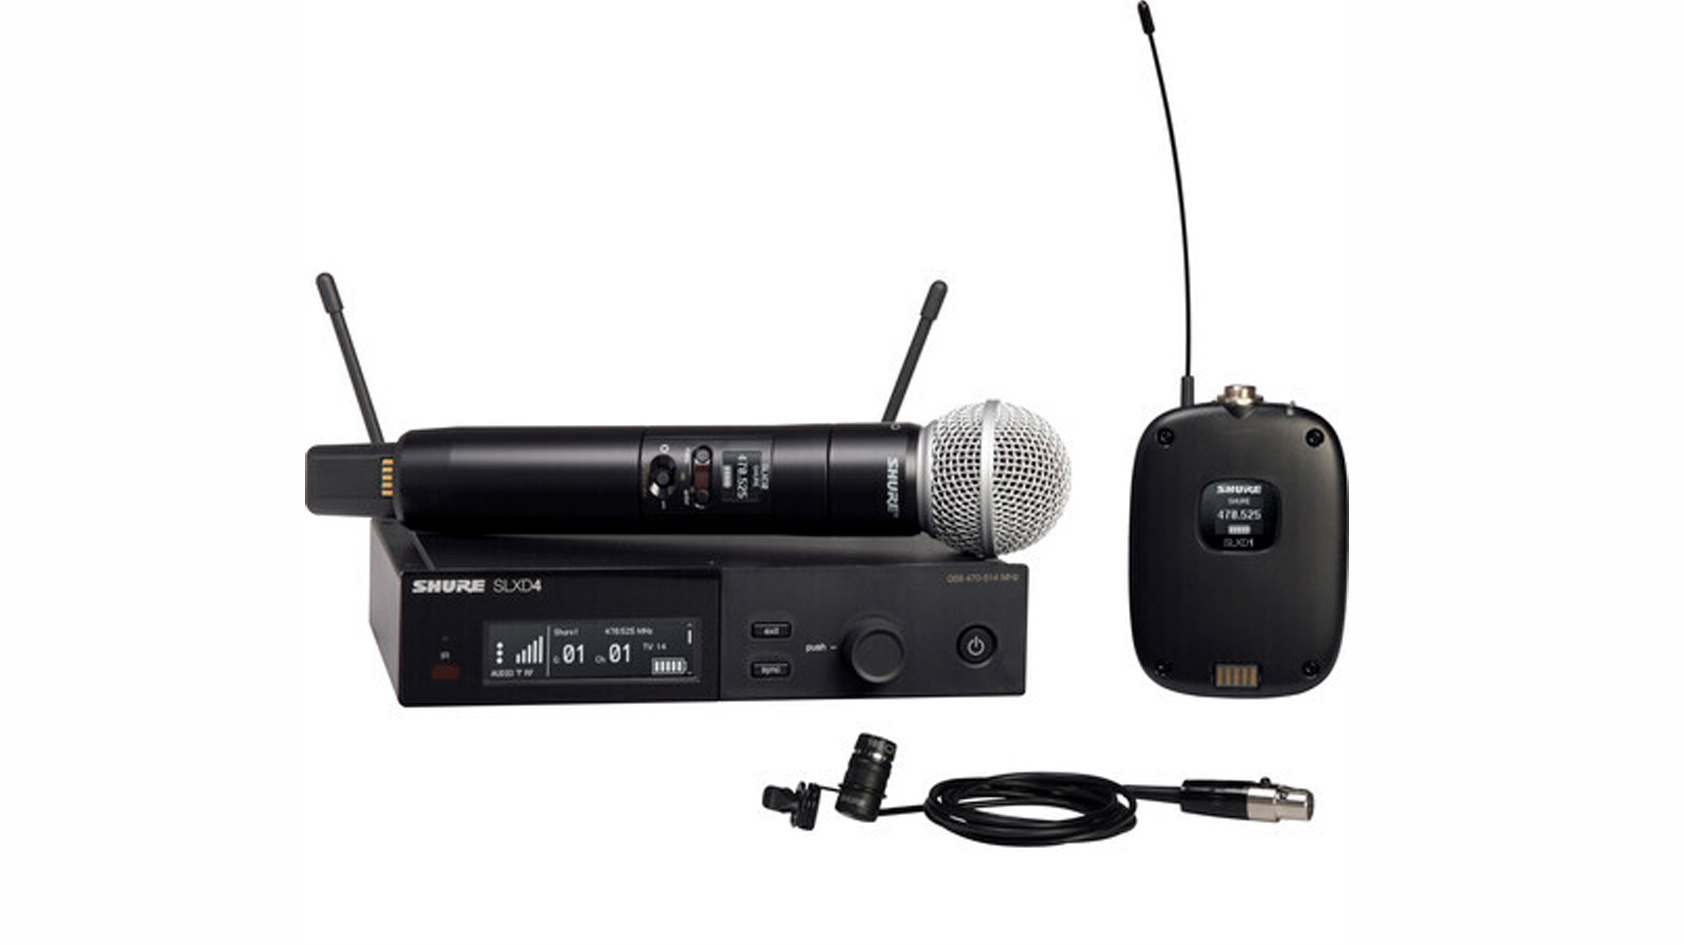 Shure SLXD124/85 wireless microphone system against a white background.